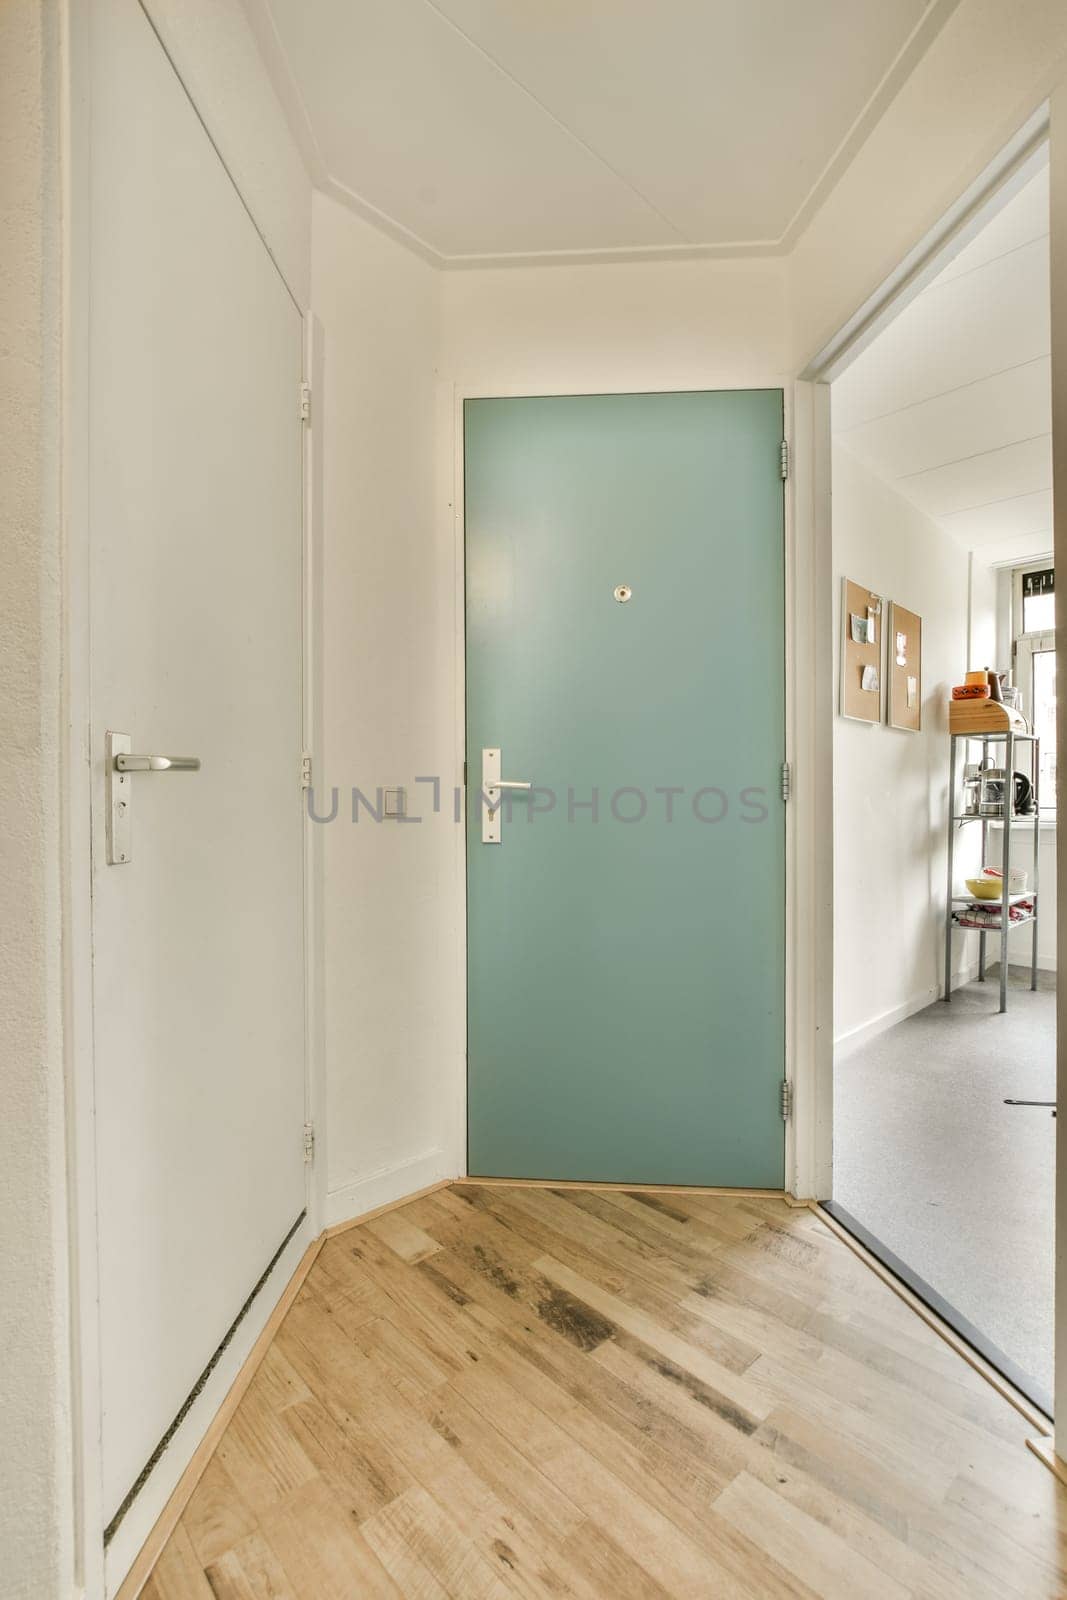 a room with a green door and a wooden floor by casamedia